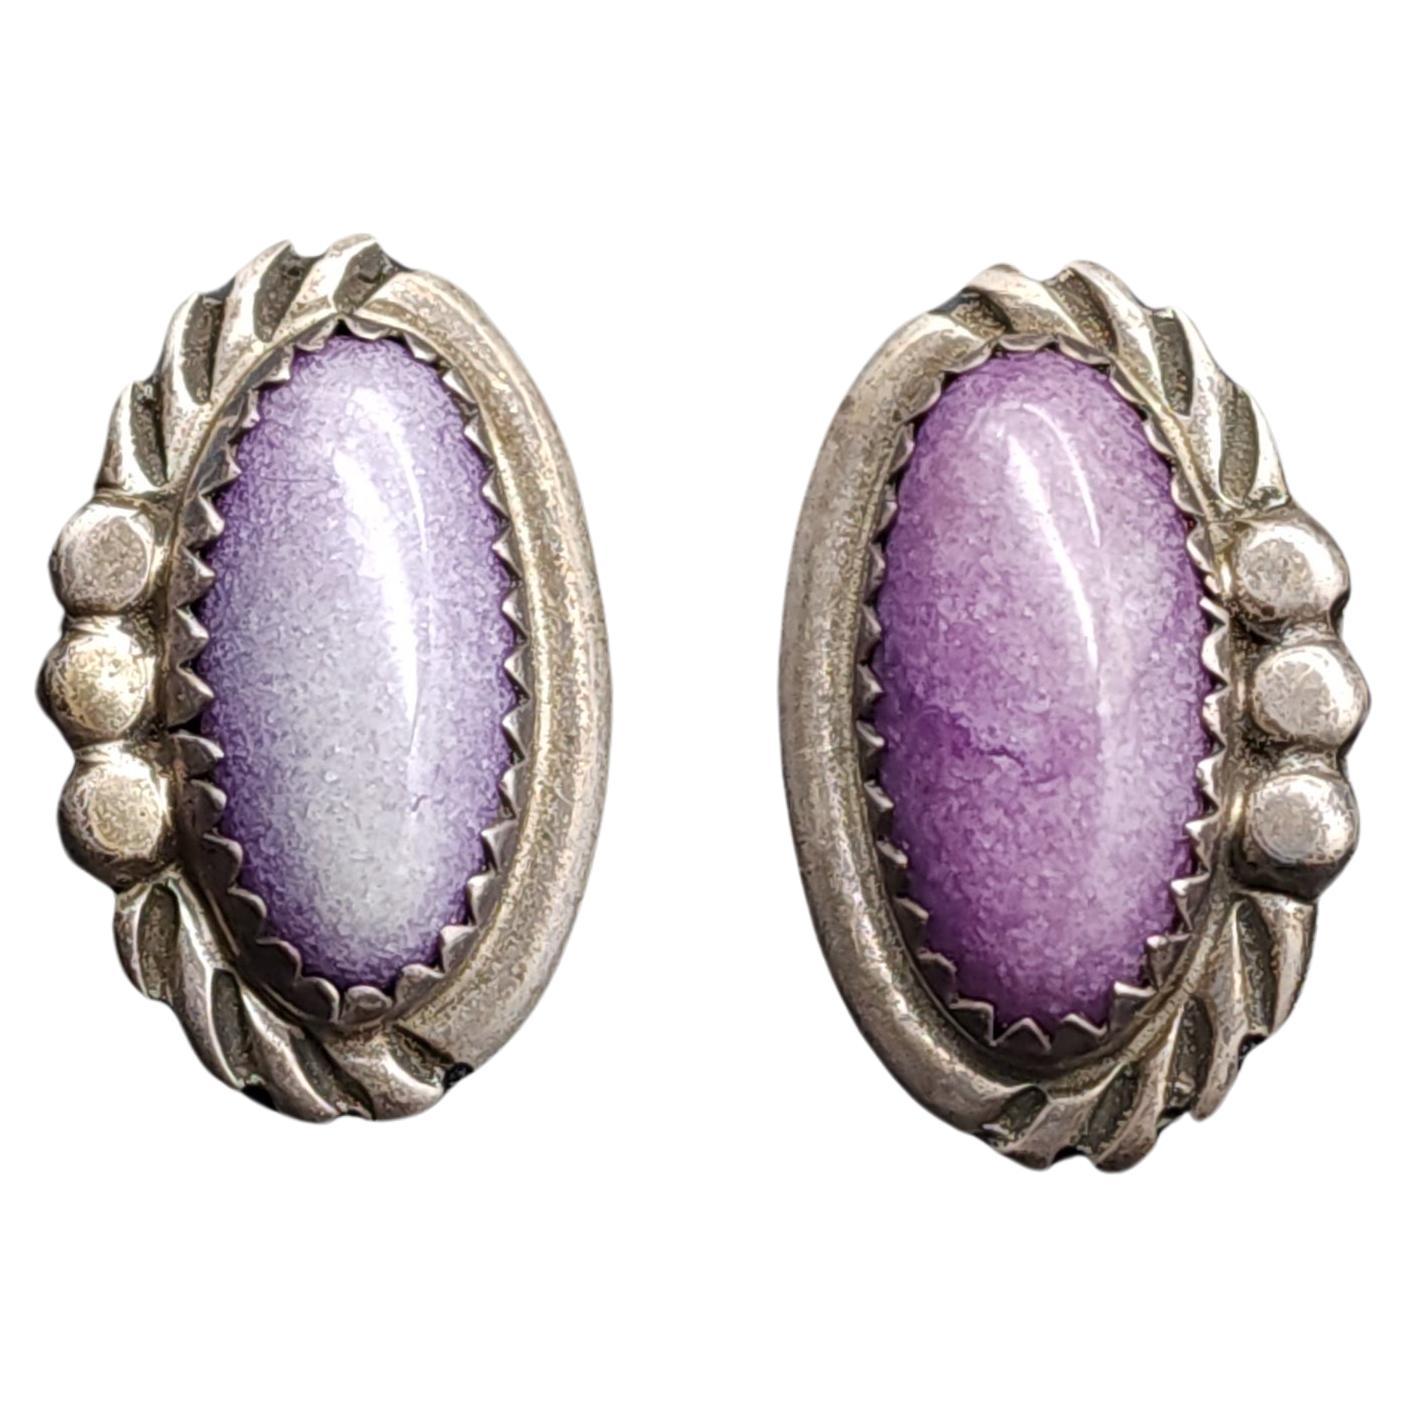 Vintage Amethyst Cabochon Clip On Earrings in Silver Tone Serrated Bezel Setting For Sale